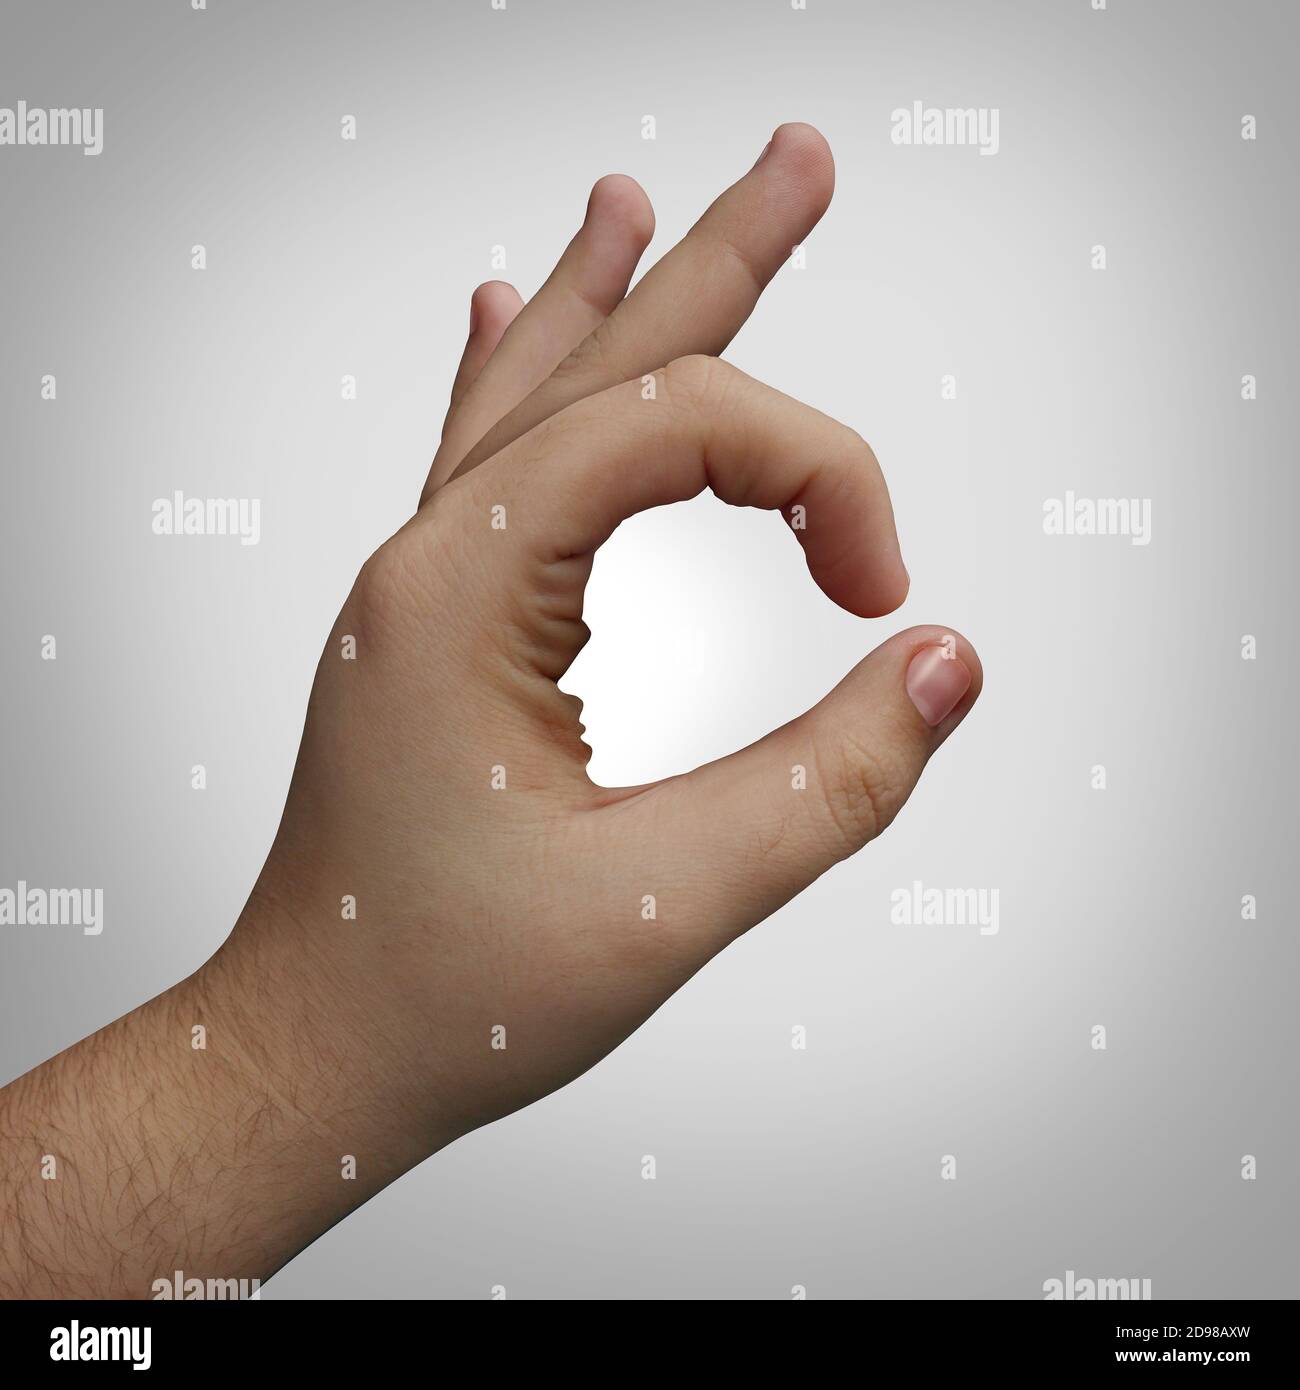 Self focus or find people concept and recruiter or human resources symbol as a hand shaped as a person representing identity and psychology. Stock Photo